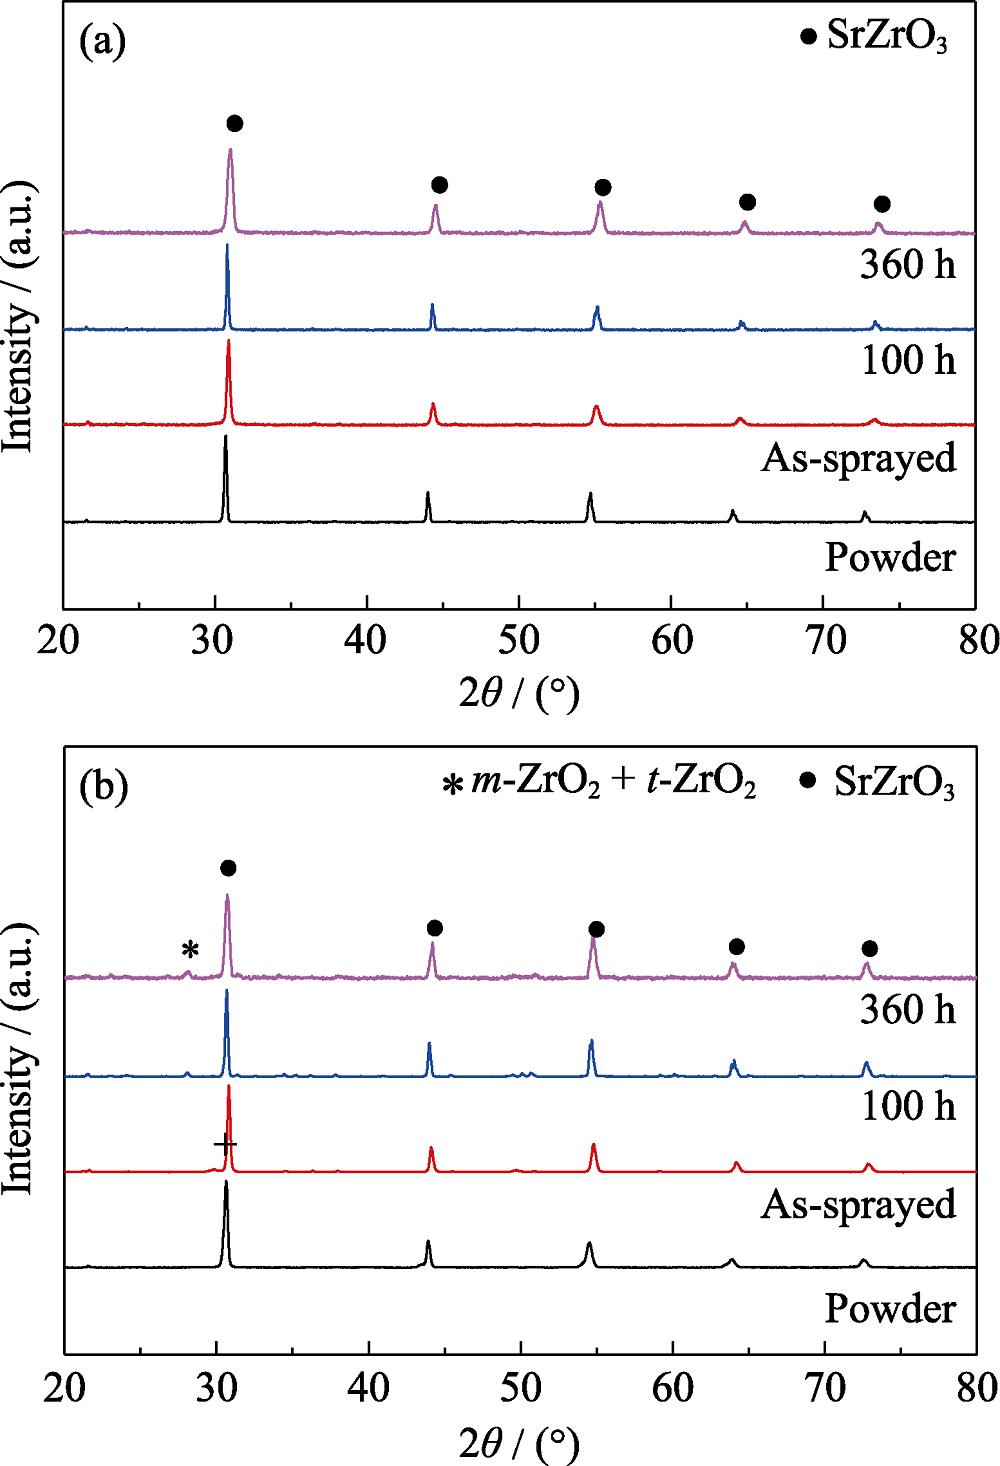 XRD patterns of powders and coatings after heat-treatment at 1600 ℃ for different time